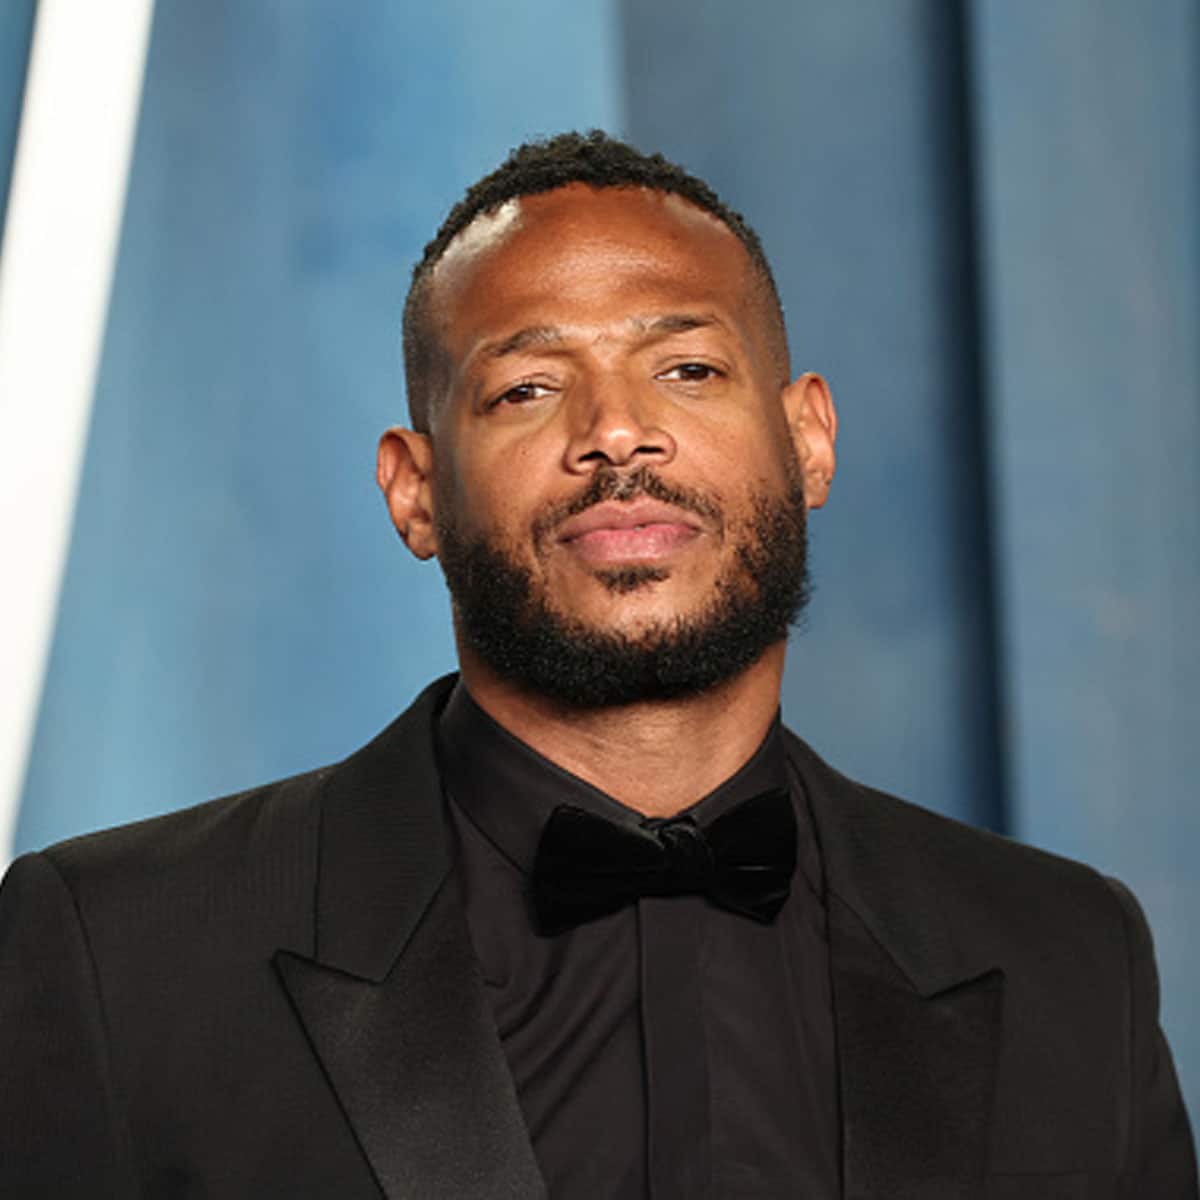 Marlon Wayans attends the 2022 Vanity Fair Oscar Party hosted by Radhika Jones